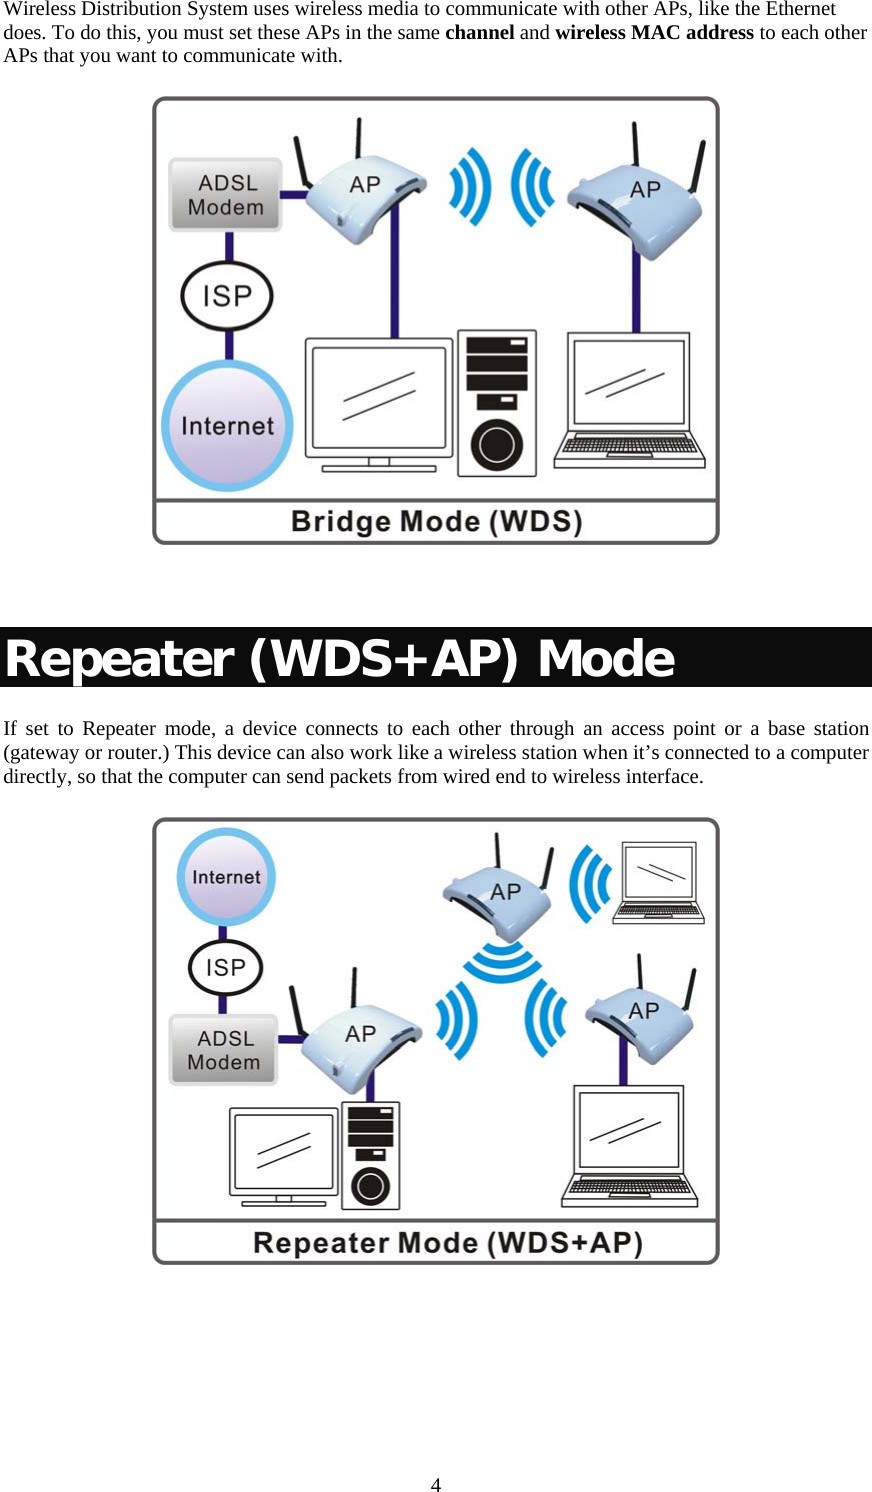   4Wireless Distribution System uses wireless media to communicate with other APs, like the Ethernet does. To do this, you must set these APs in the same channel and wireless MAC address to each other APs that you want to communicate with.    Repeater (WDS+AP) Mode If set to Repeater mode, a device connects to each other through an access point or a base station (gateway or router.) This device can also work like a wireless station when it’s connected to a computer directly, so that the computer can send packets from wired end to wireless interface.   